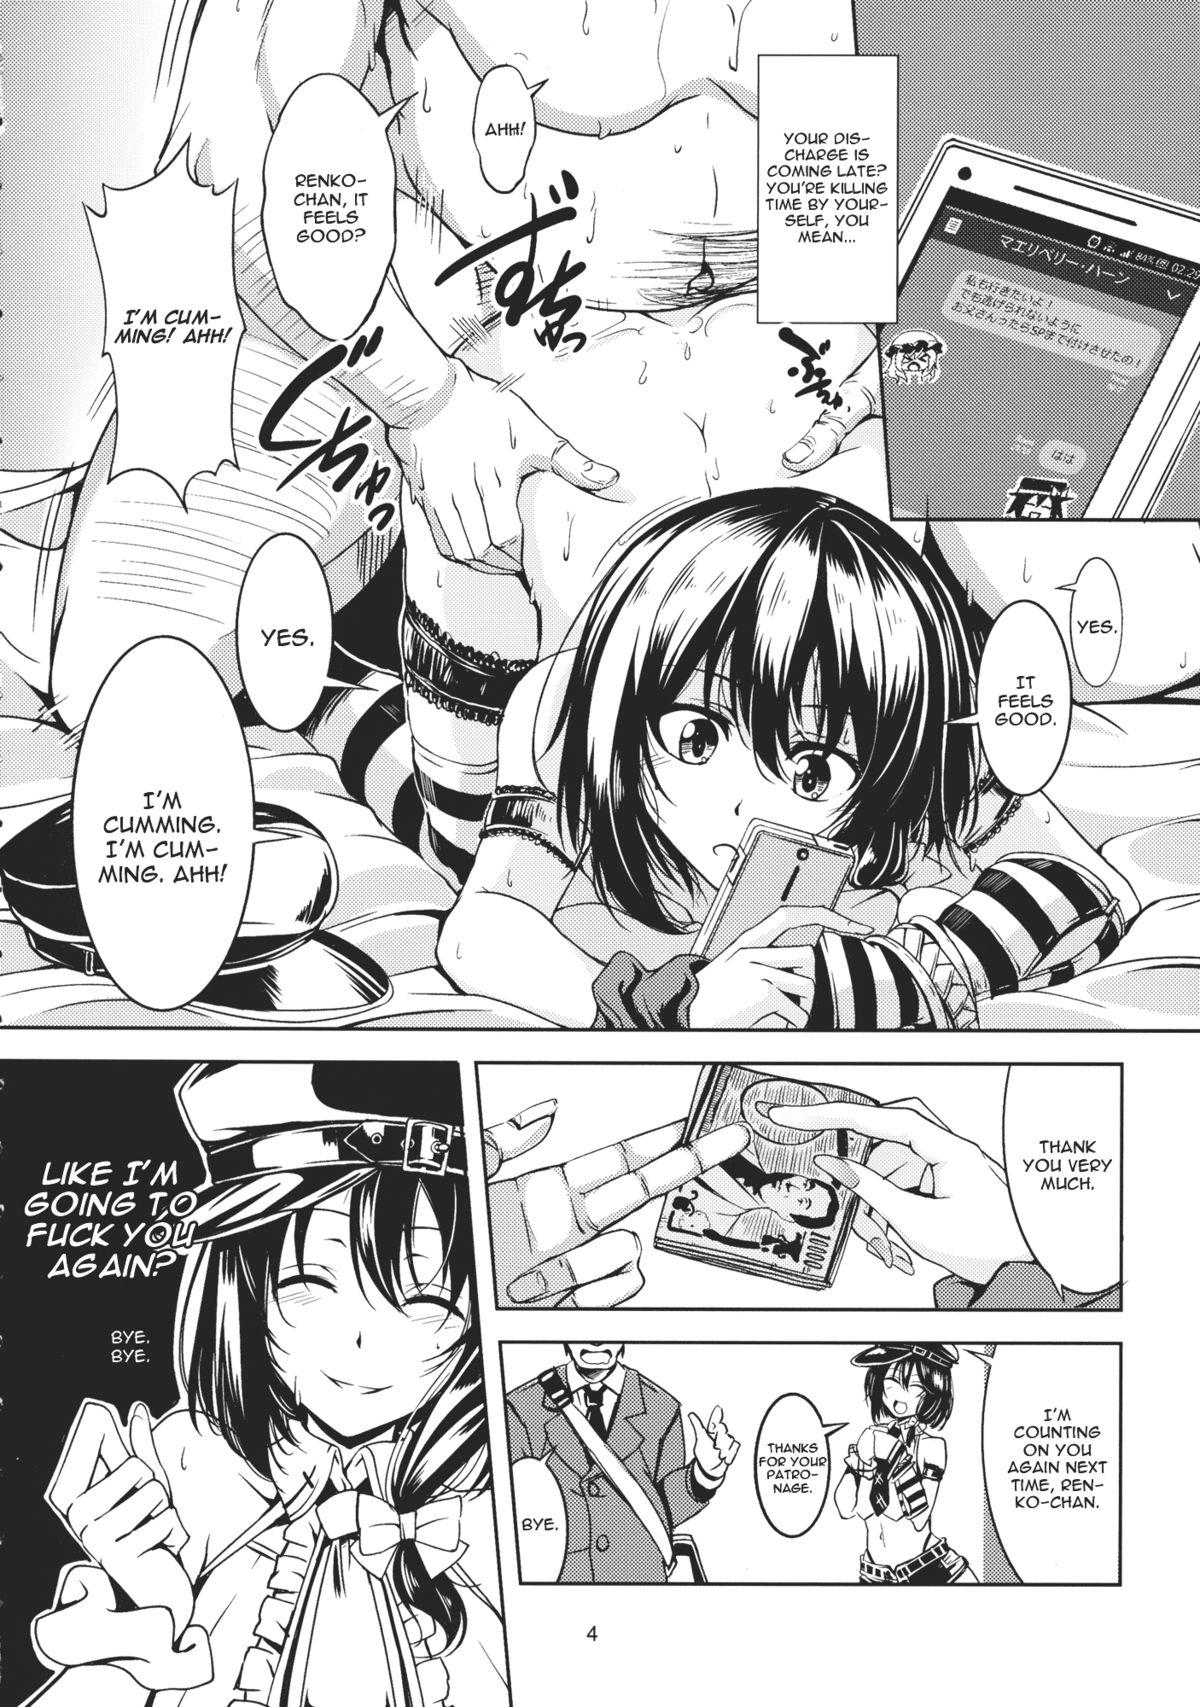 Blackmail Bitch Up, Girls! - Touhou project Creampies - Page 5